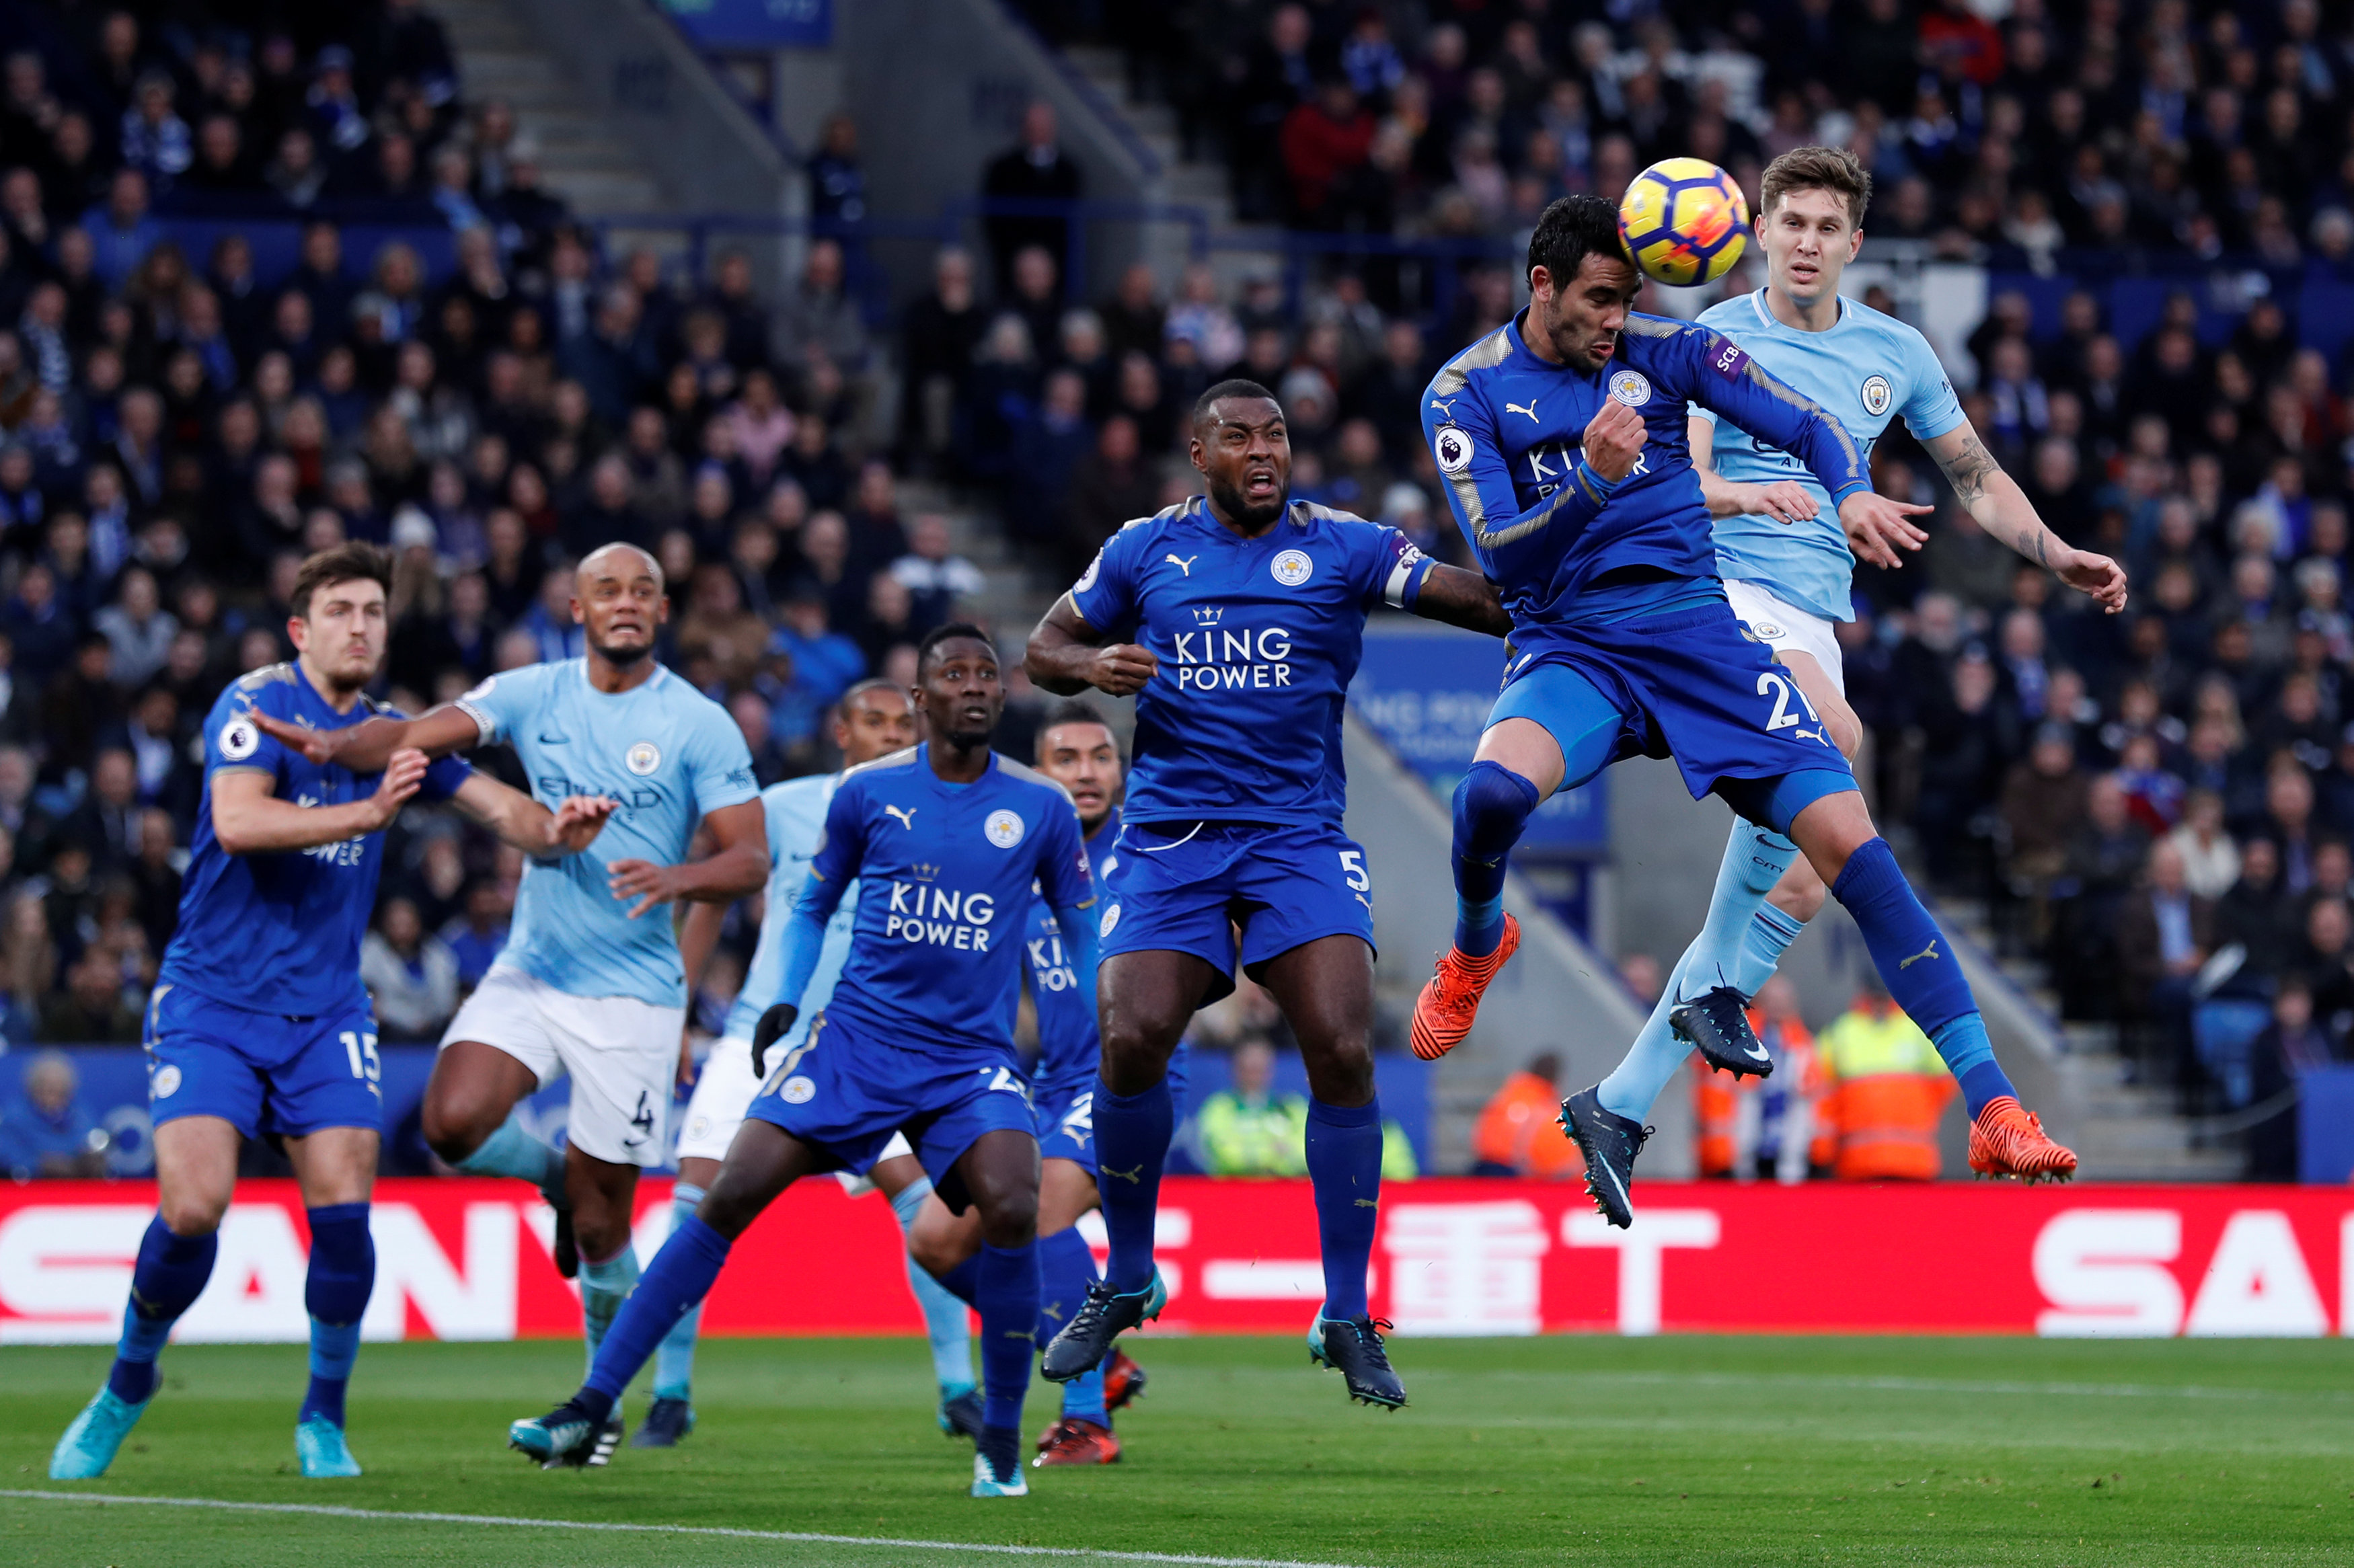 Football: Sweet 16 as leaders Man City brush past Leicester City